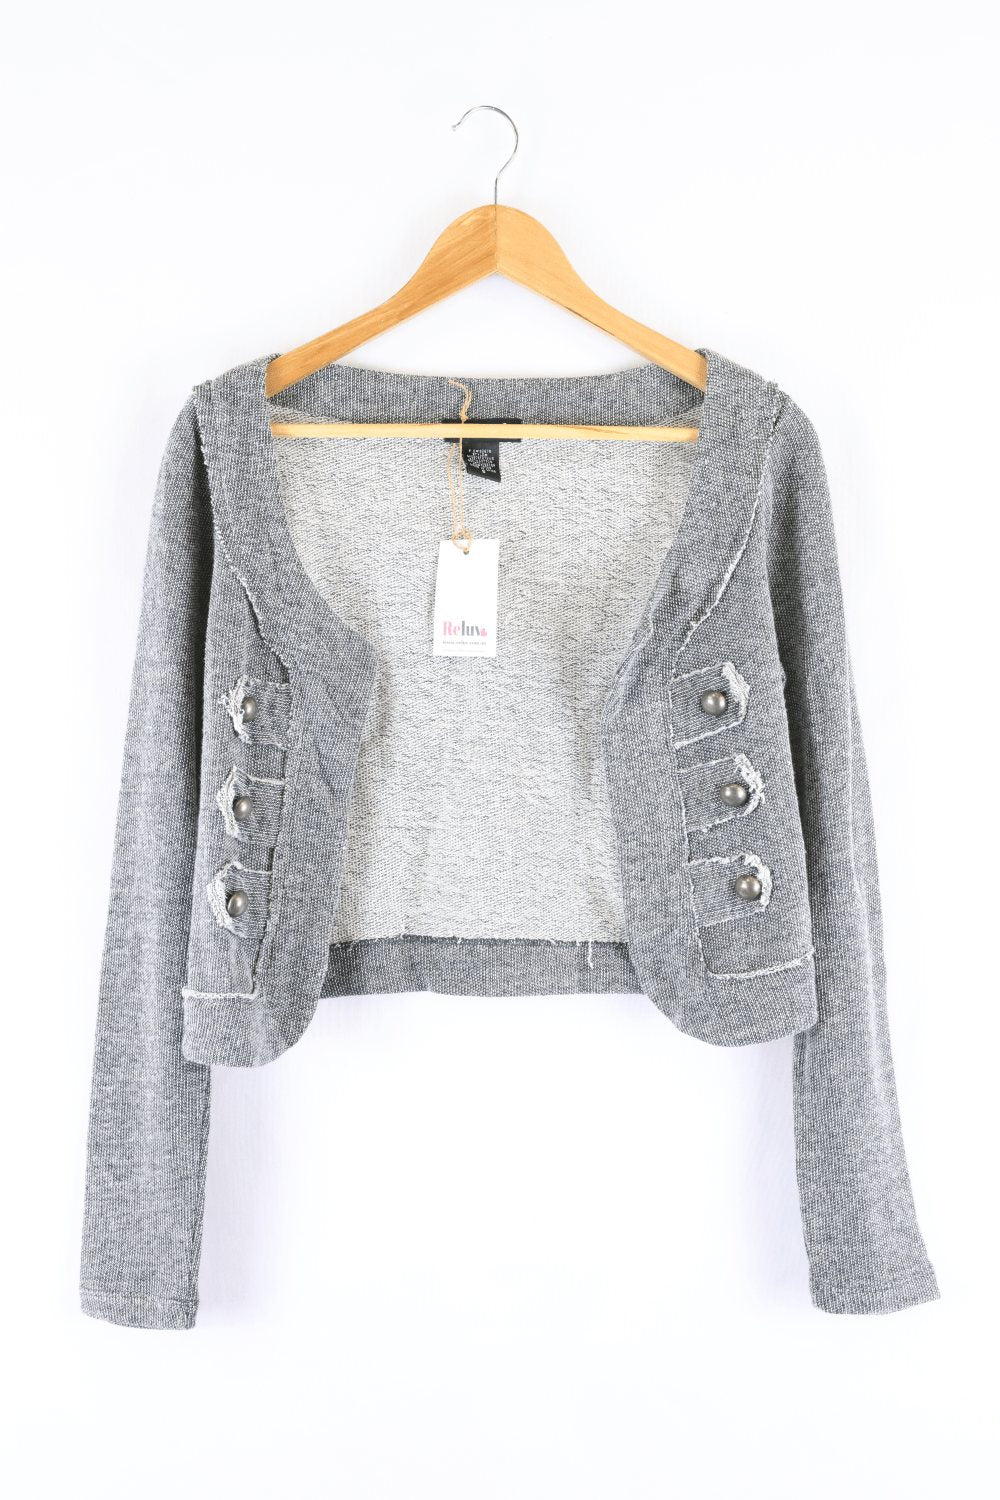 Wet Seal Knit Grey Cropped Cardigan S